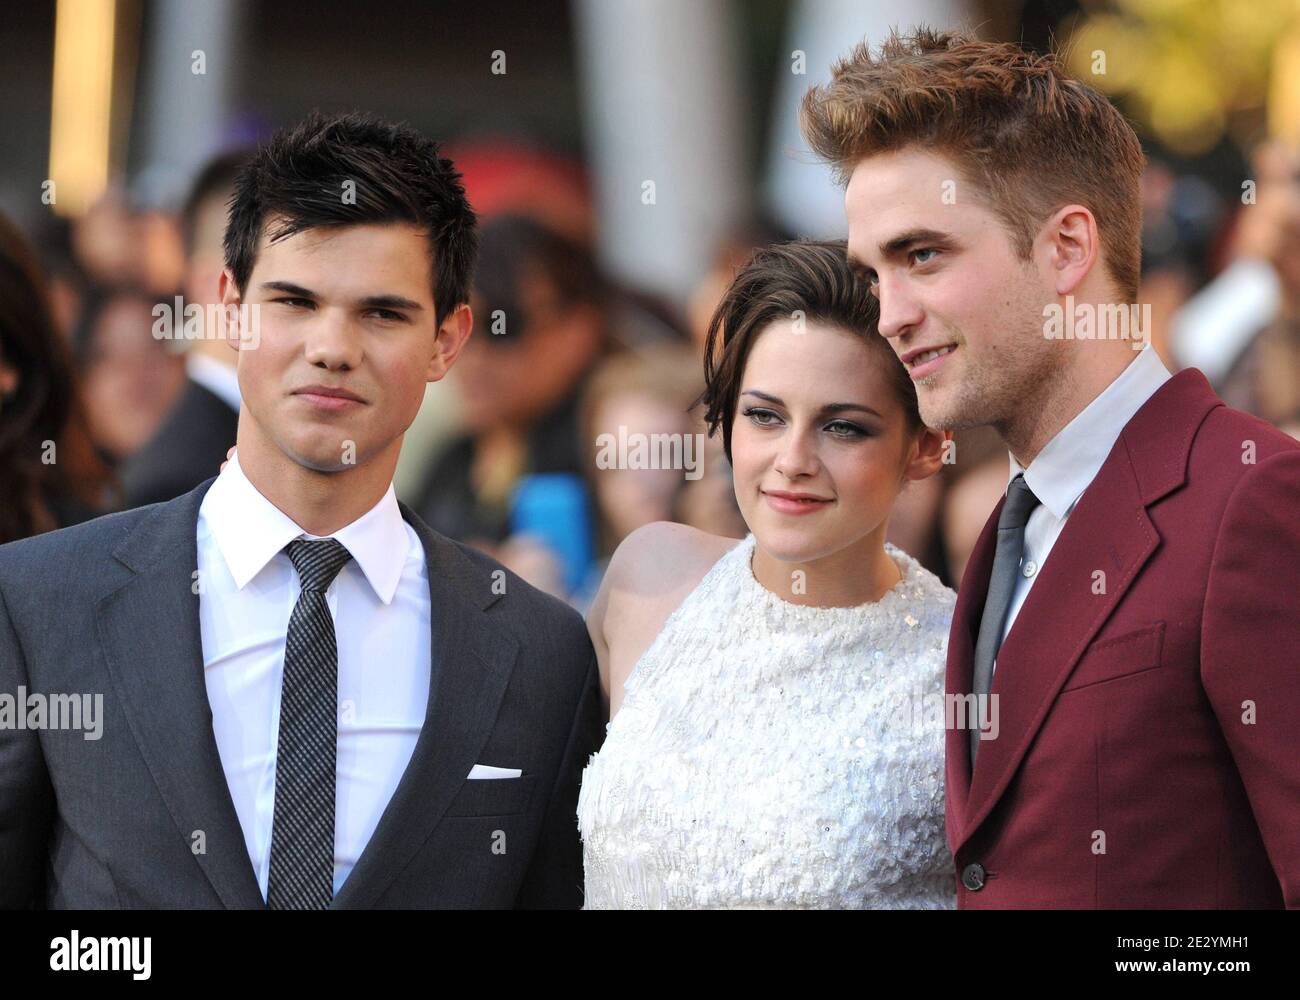 'Robert Pattinson, Kristen Stewart and Taylor Lautner attend the premiere of ''The Twilight Saga: Eclipse'' part of the 2010 Los Angeles Film Festival. Los Angeles, June 24, 2010. (Pictured : Robert Pattinson, Kristen Stewart, Taylor Lautner). Photo by Lionel Hahn/ABACAPRESS.COM' Stock Photo